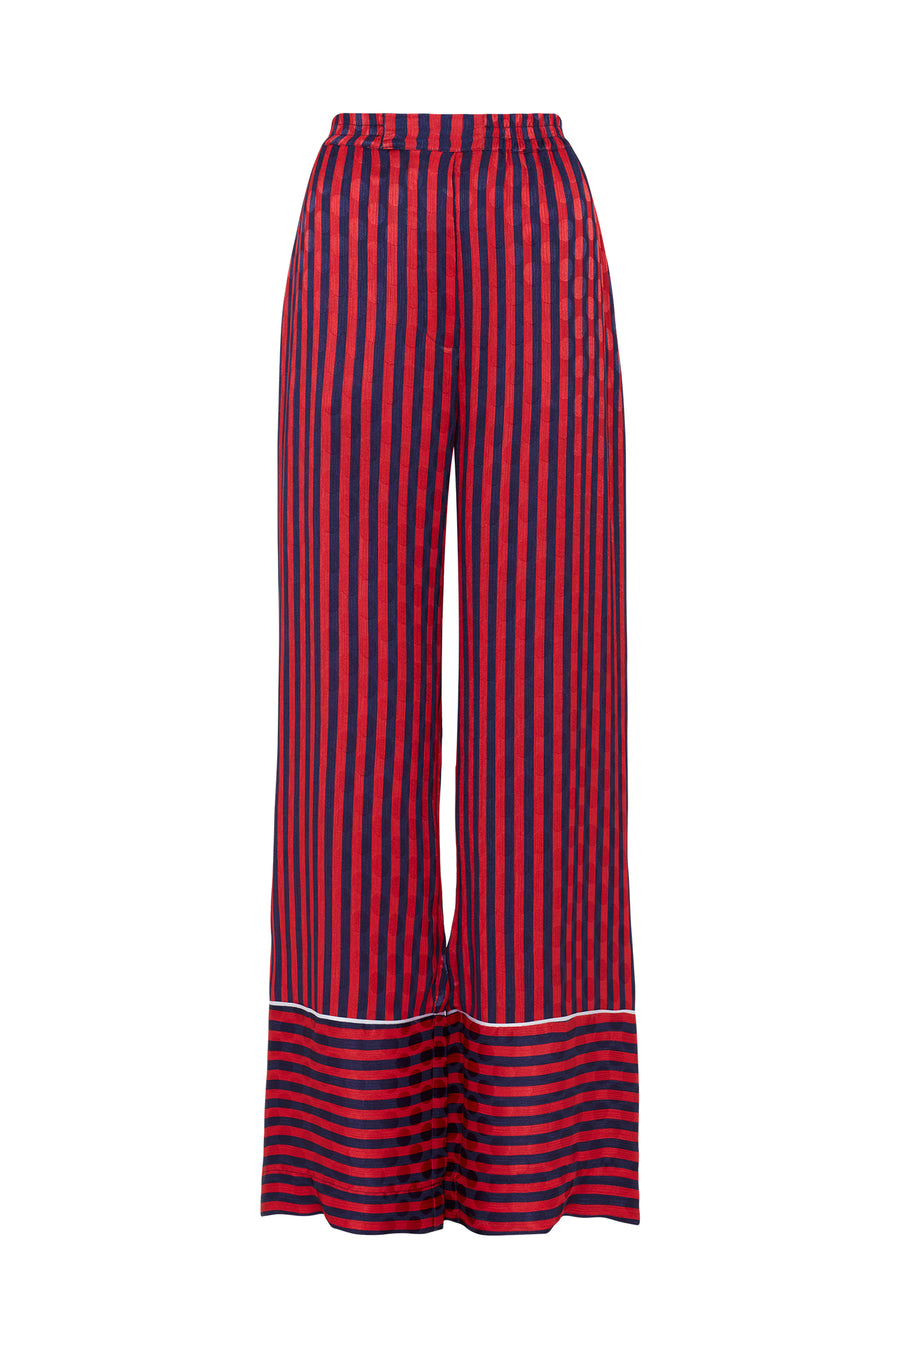 Red and Navy Stripped Pyjama Style Trousers by House of Holland